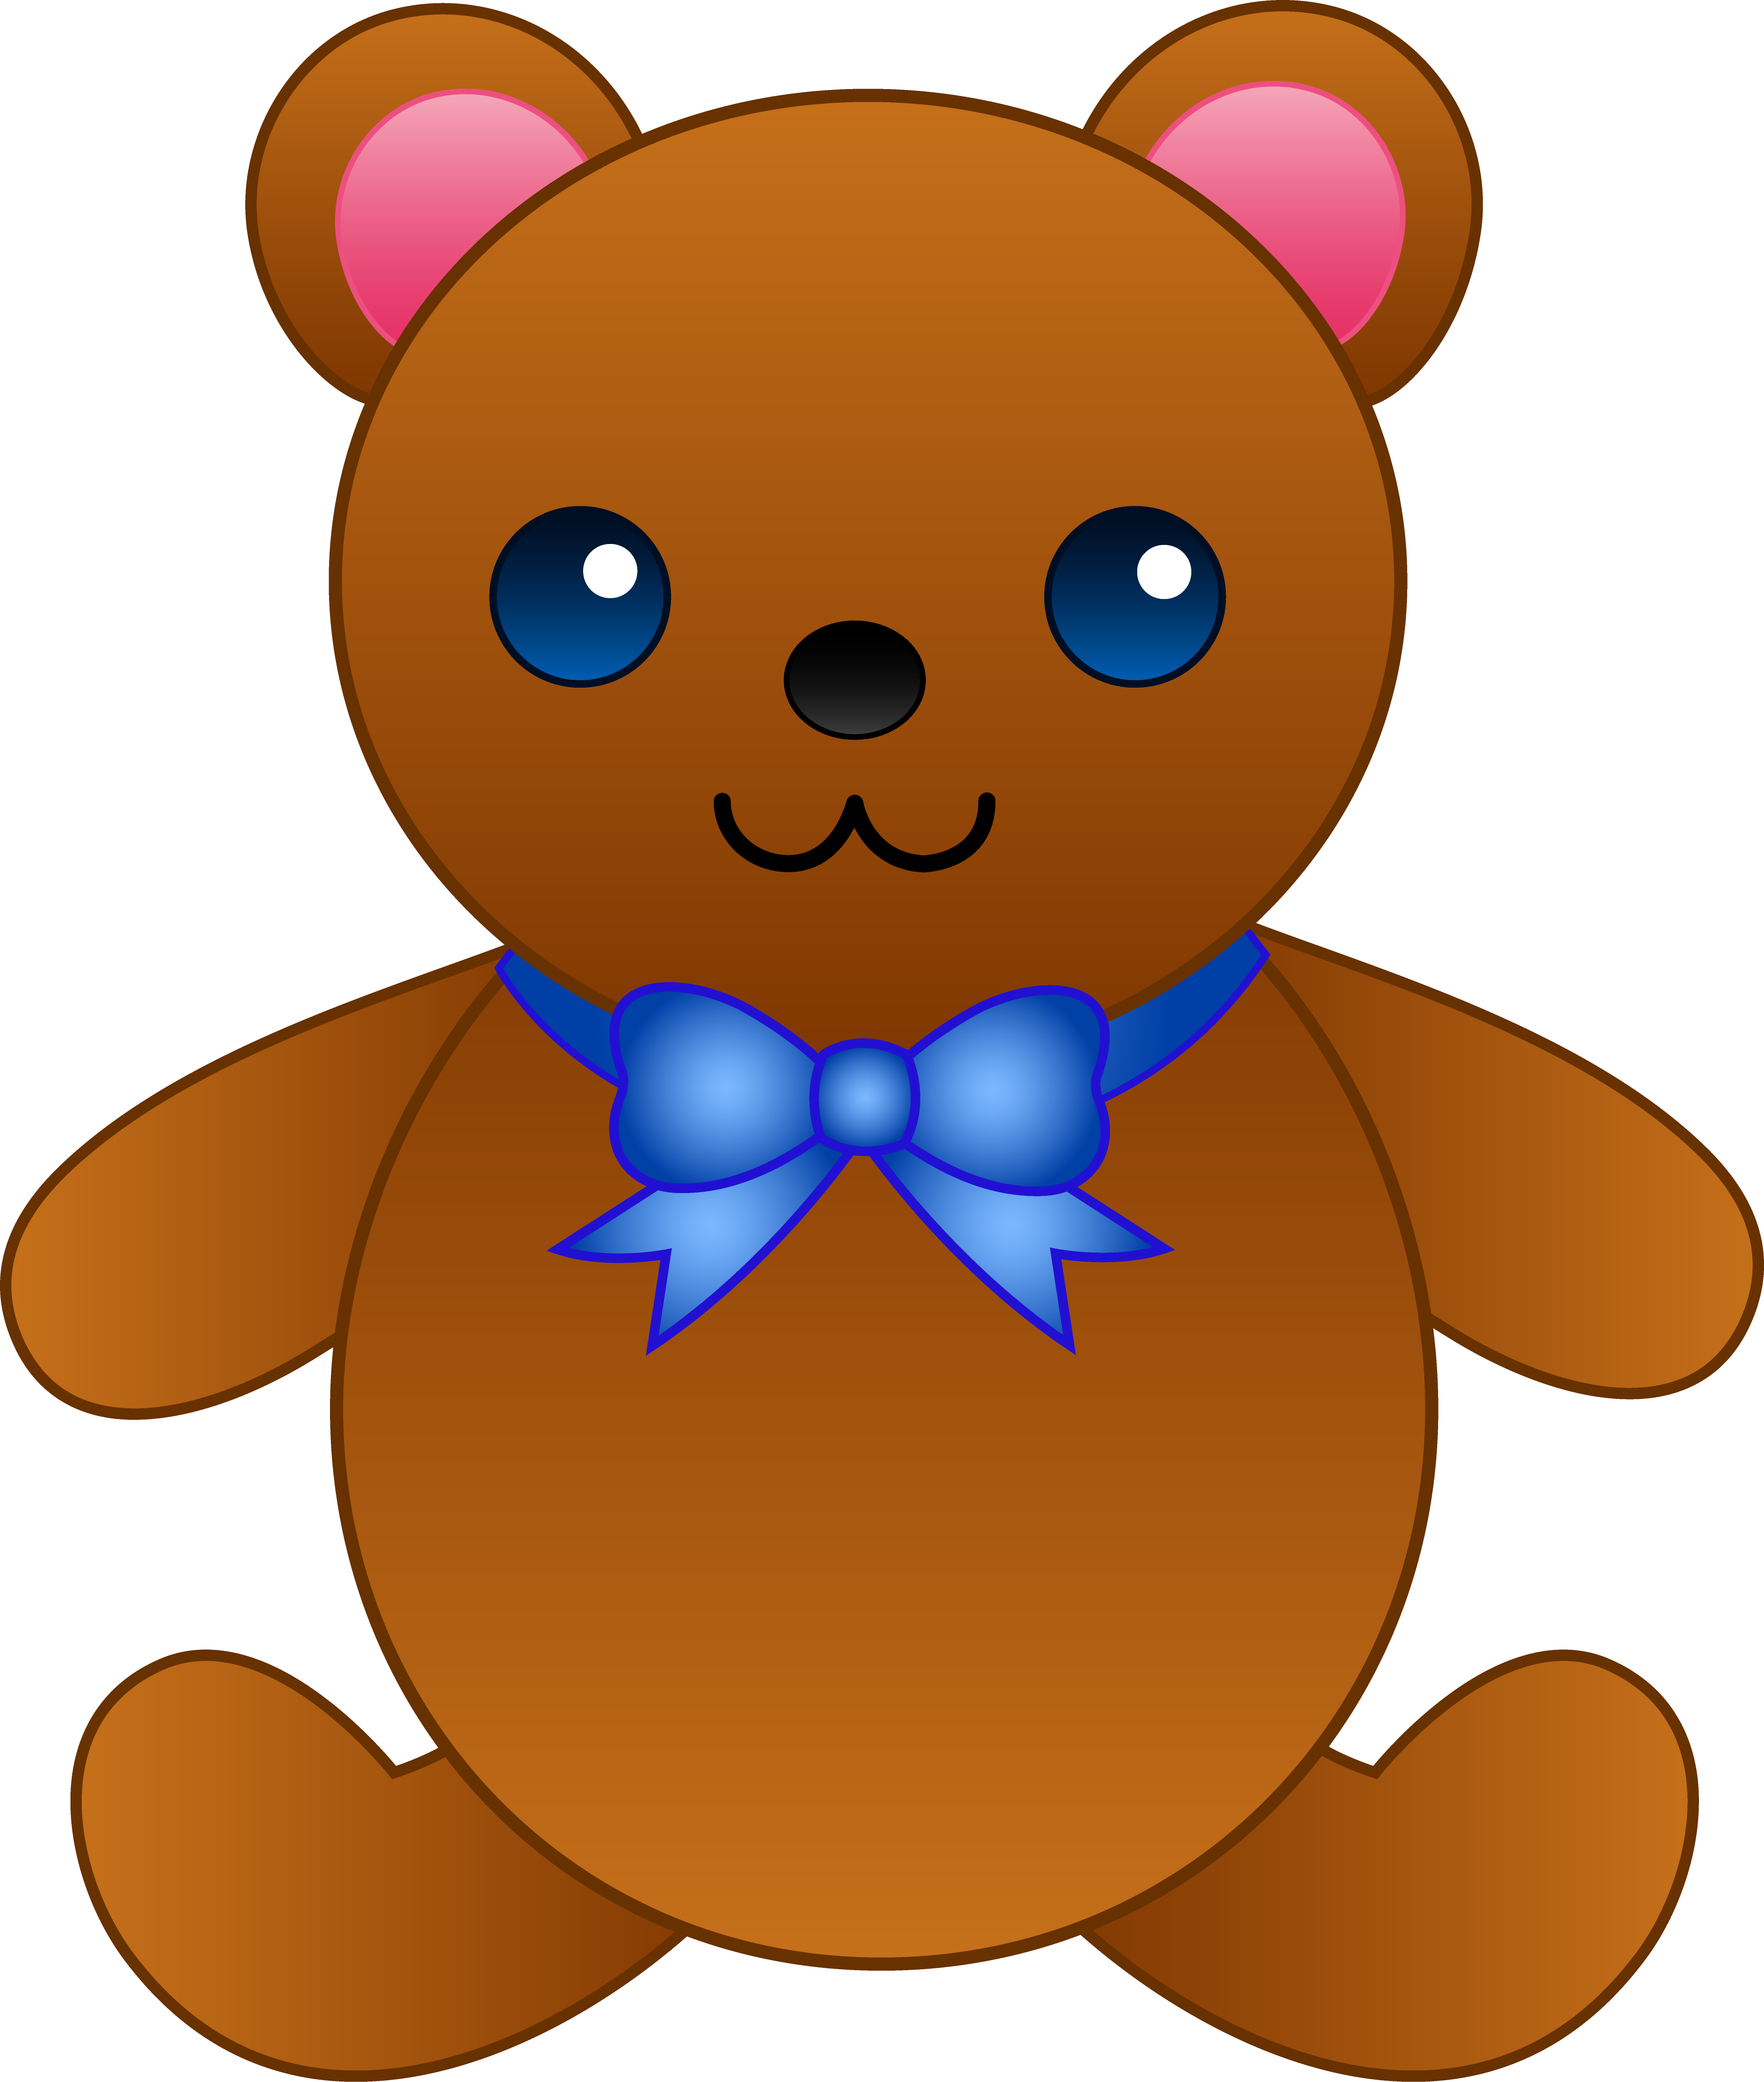 Images For  Teddy Bear Cartoon Images